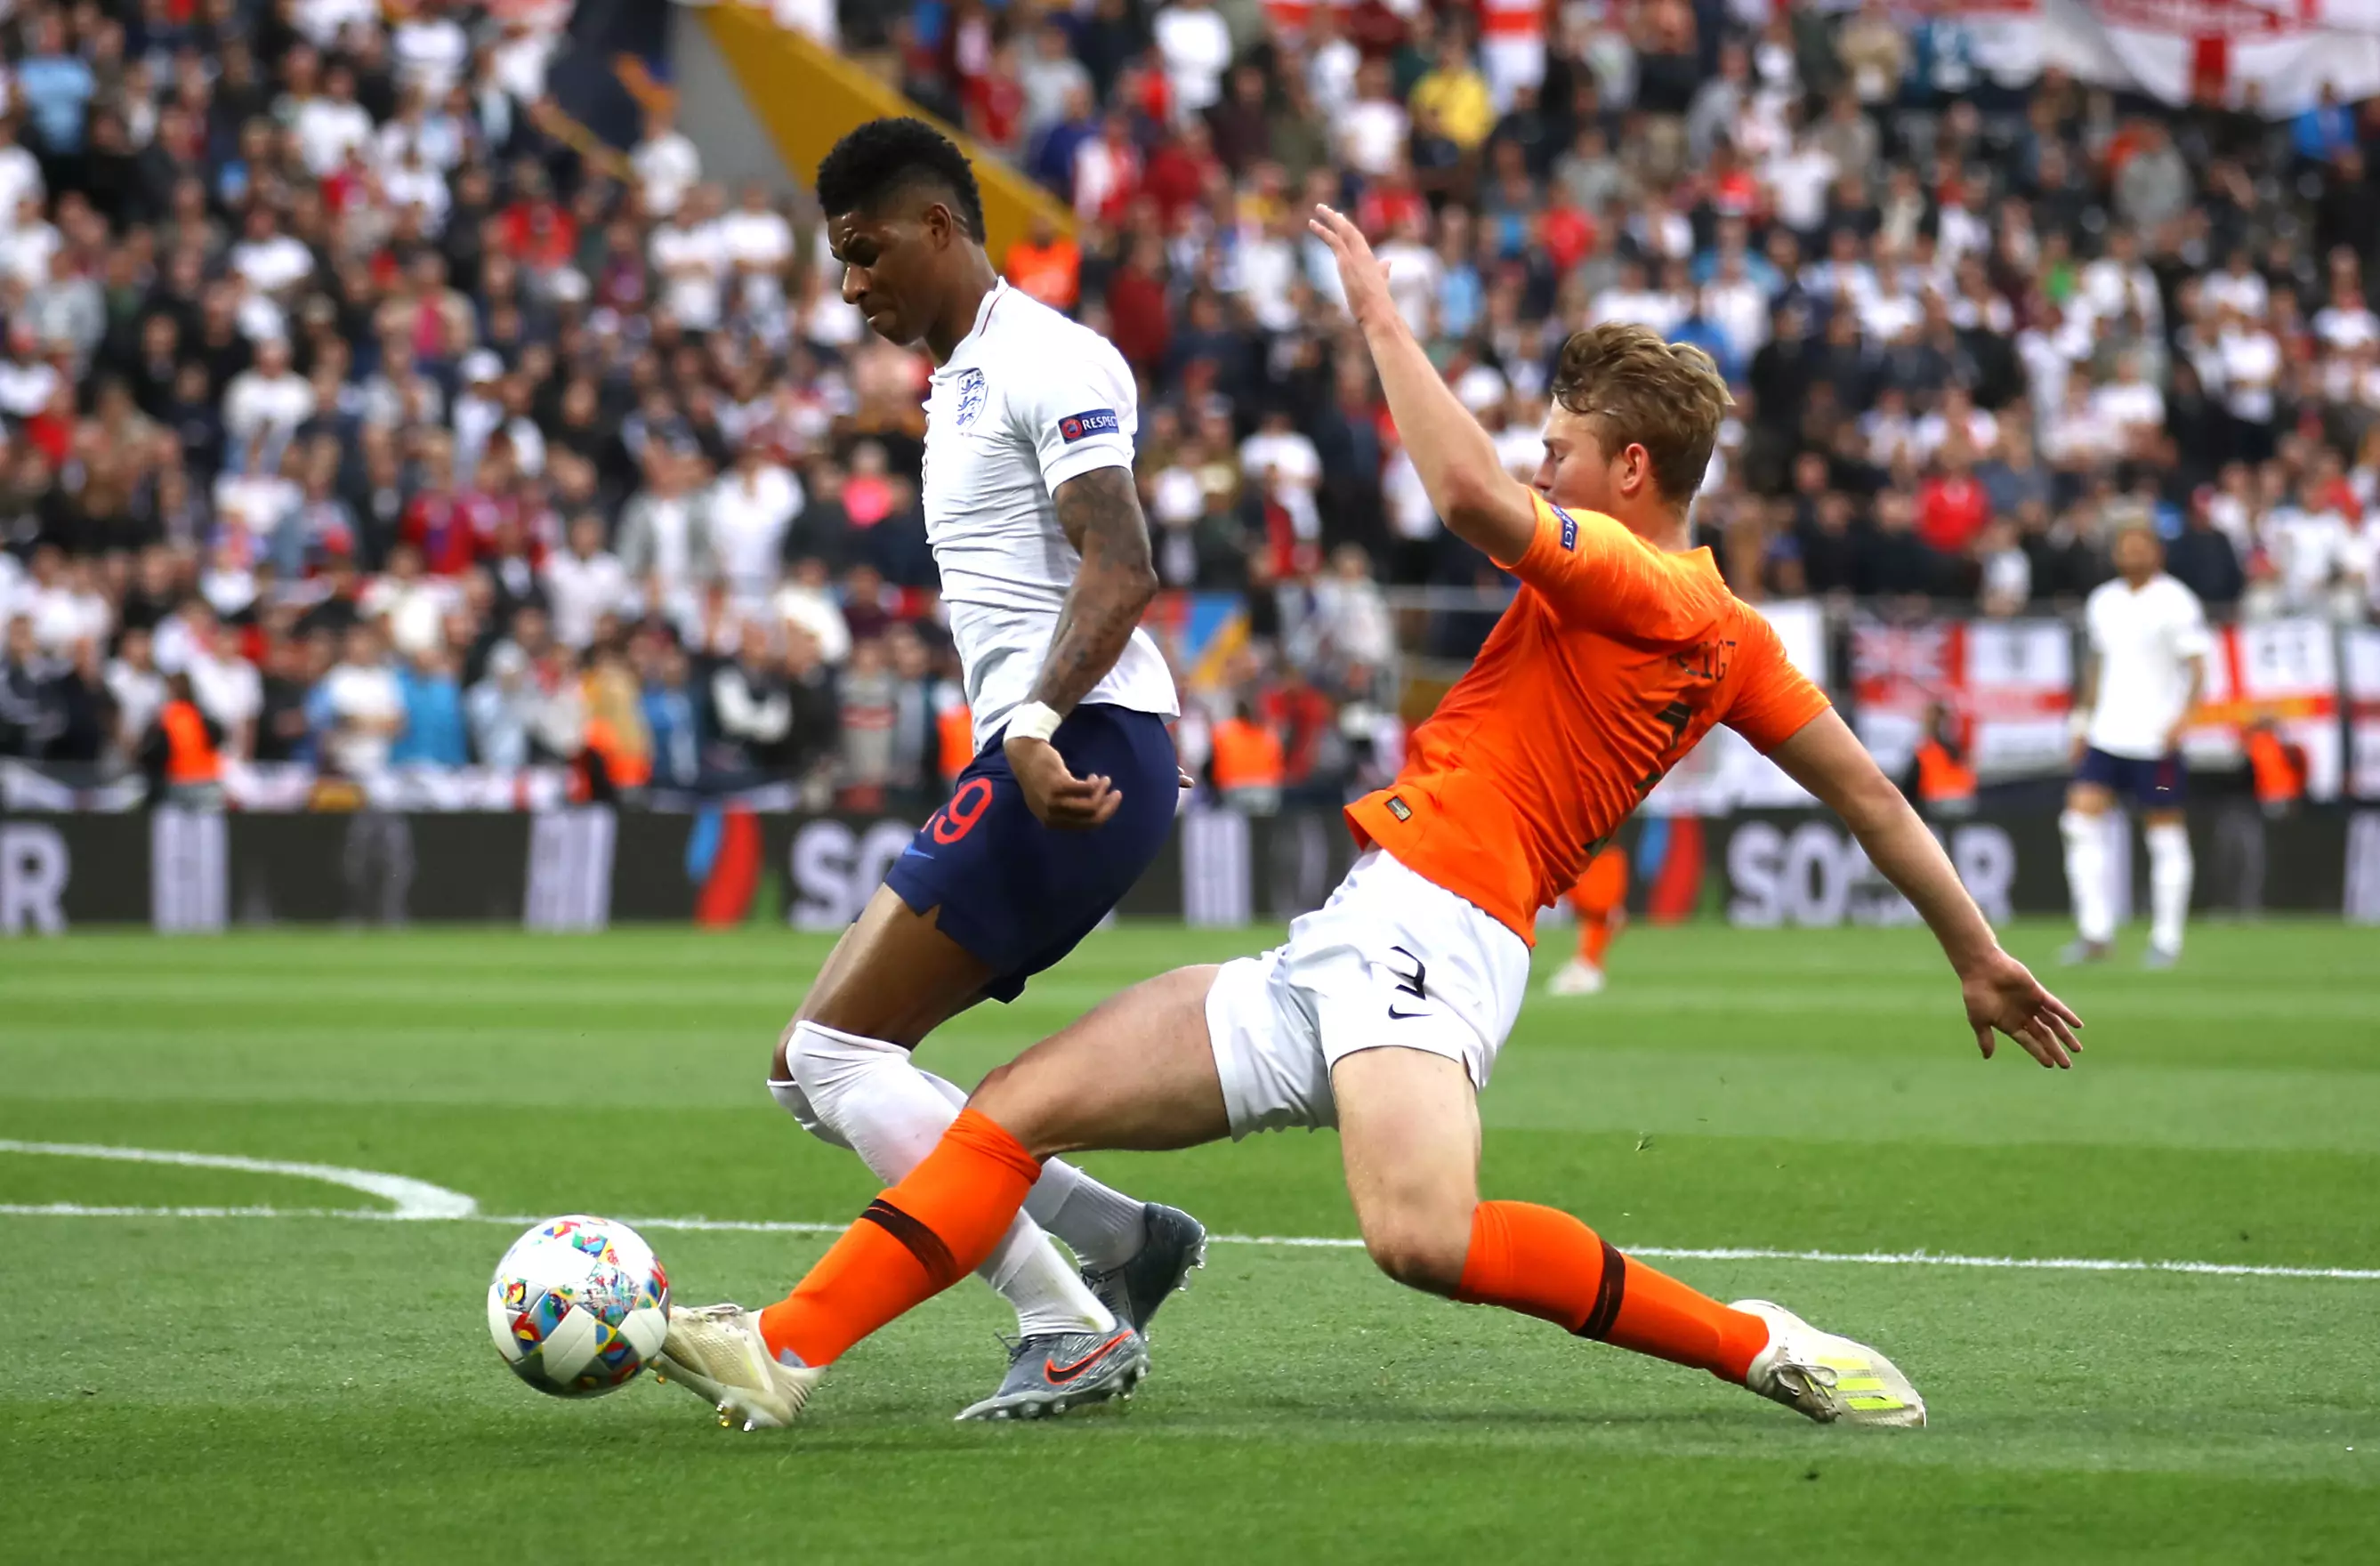 Rashford saw himself brought down by de Ligt for the penalty (Image